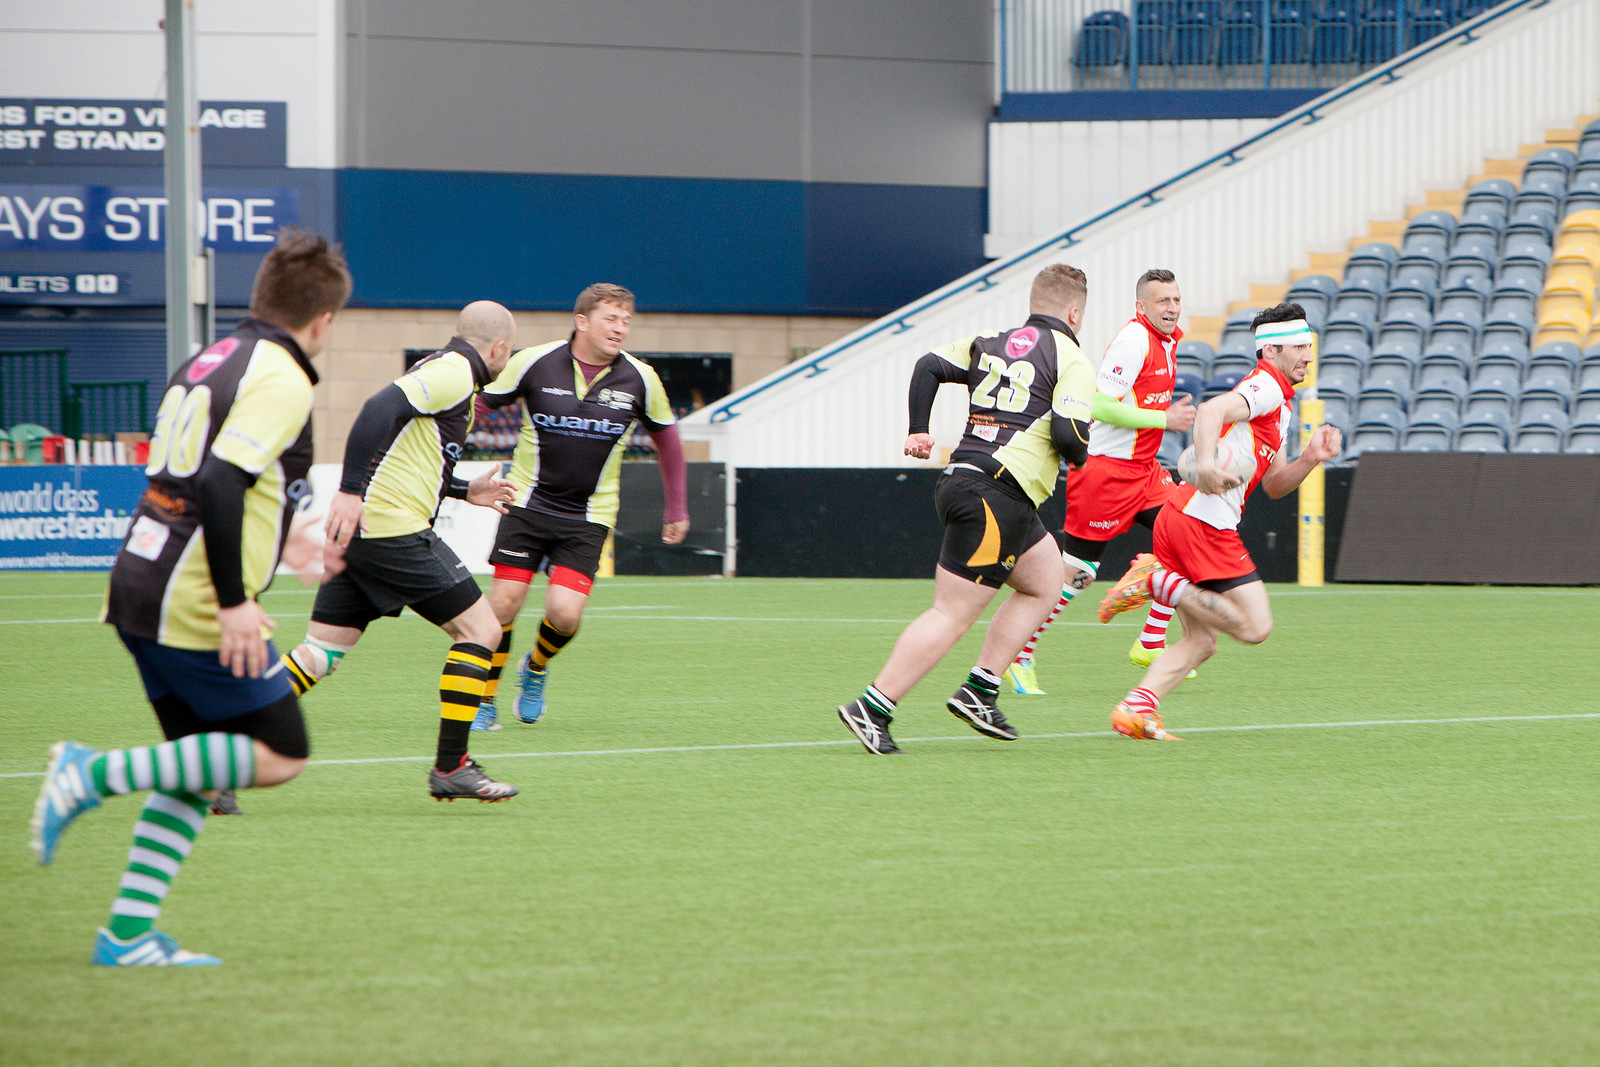 Bridgnorth firefighter Luke Veal (in green sleeves) during the 30 hour world beating rugby challenge for charity